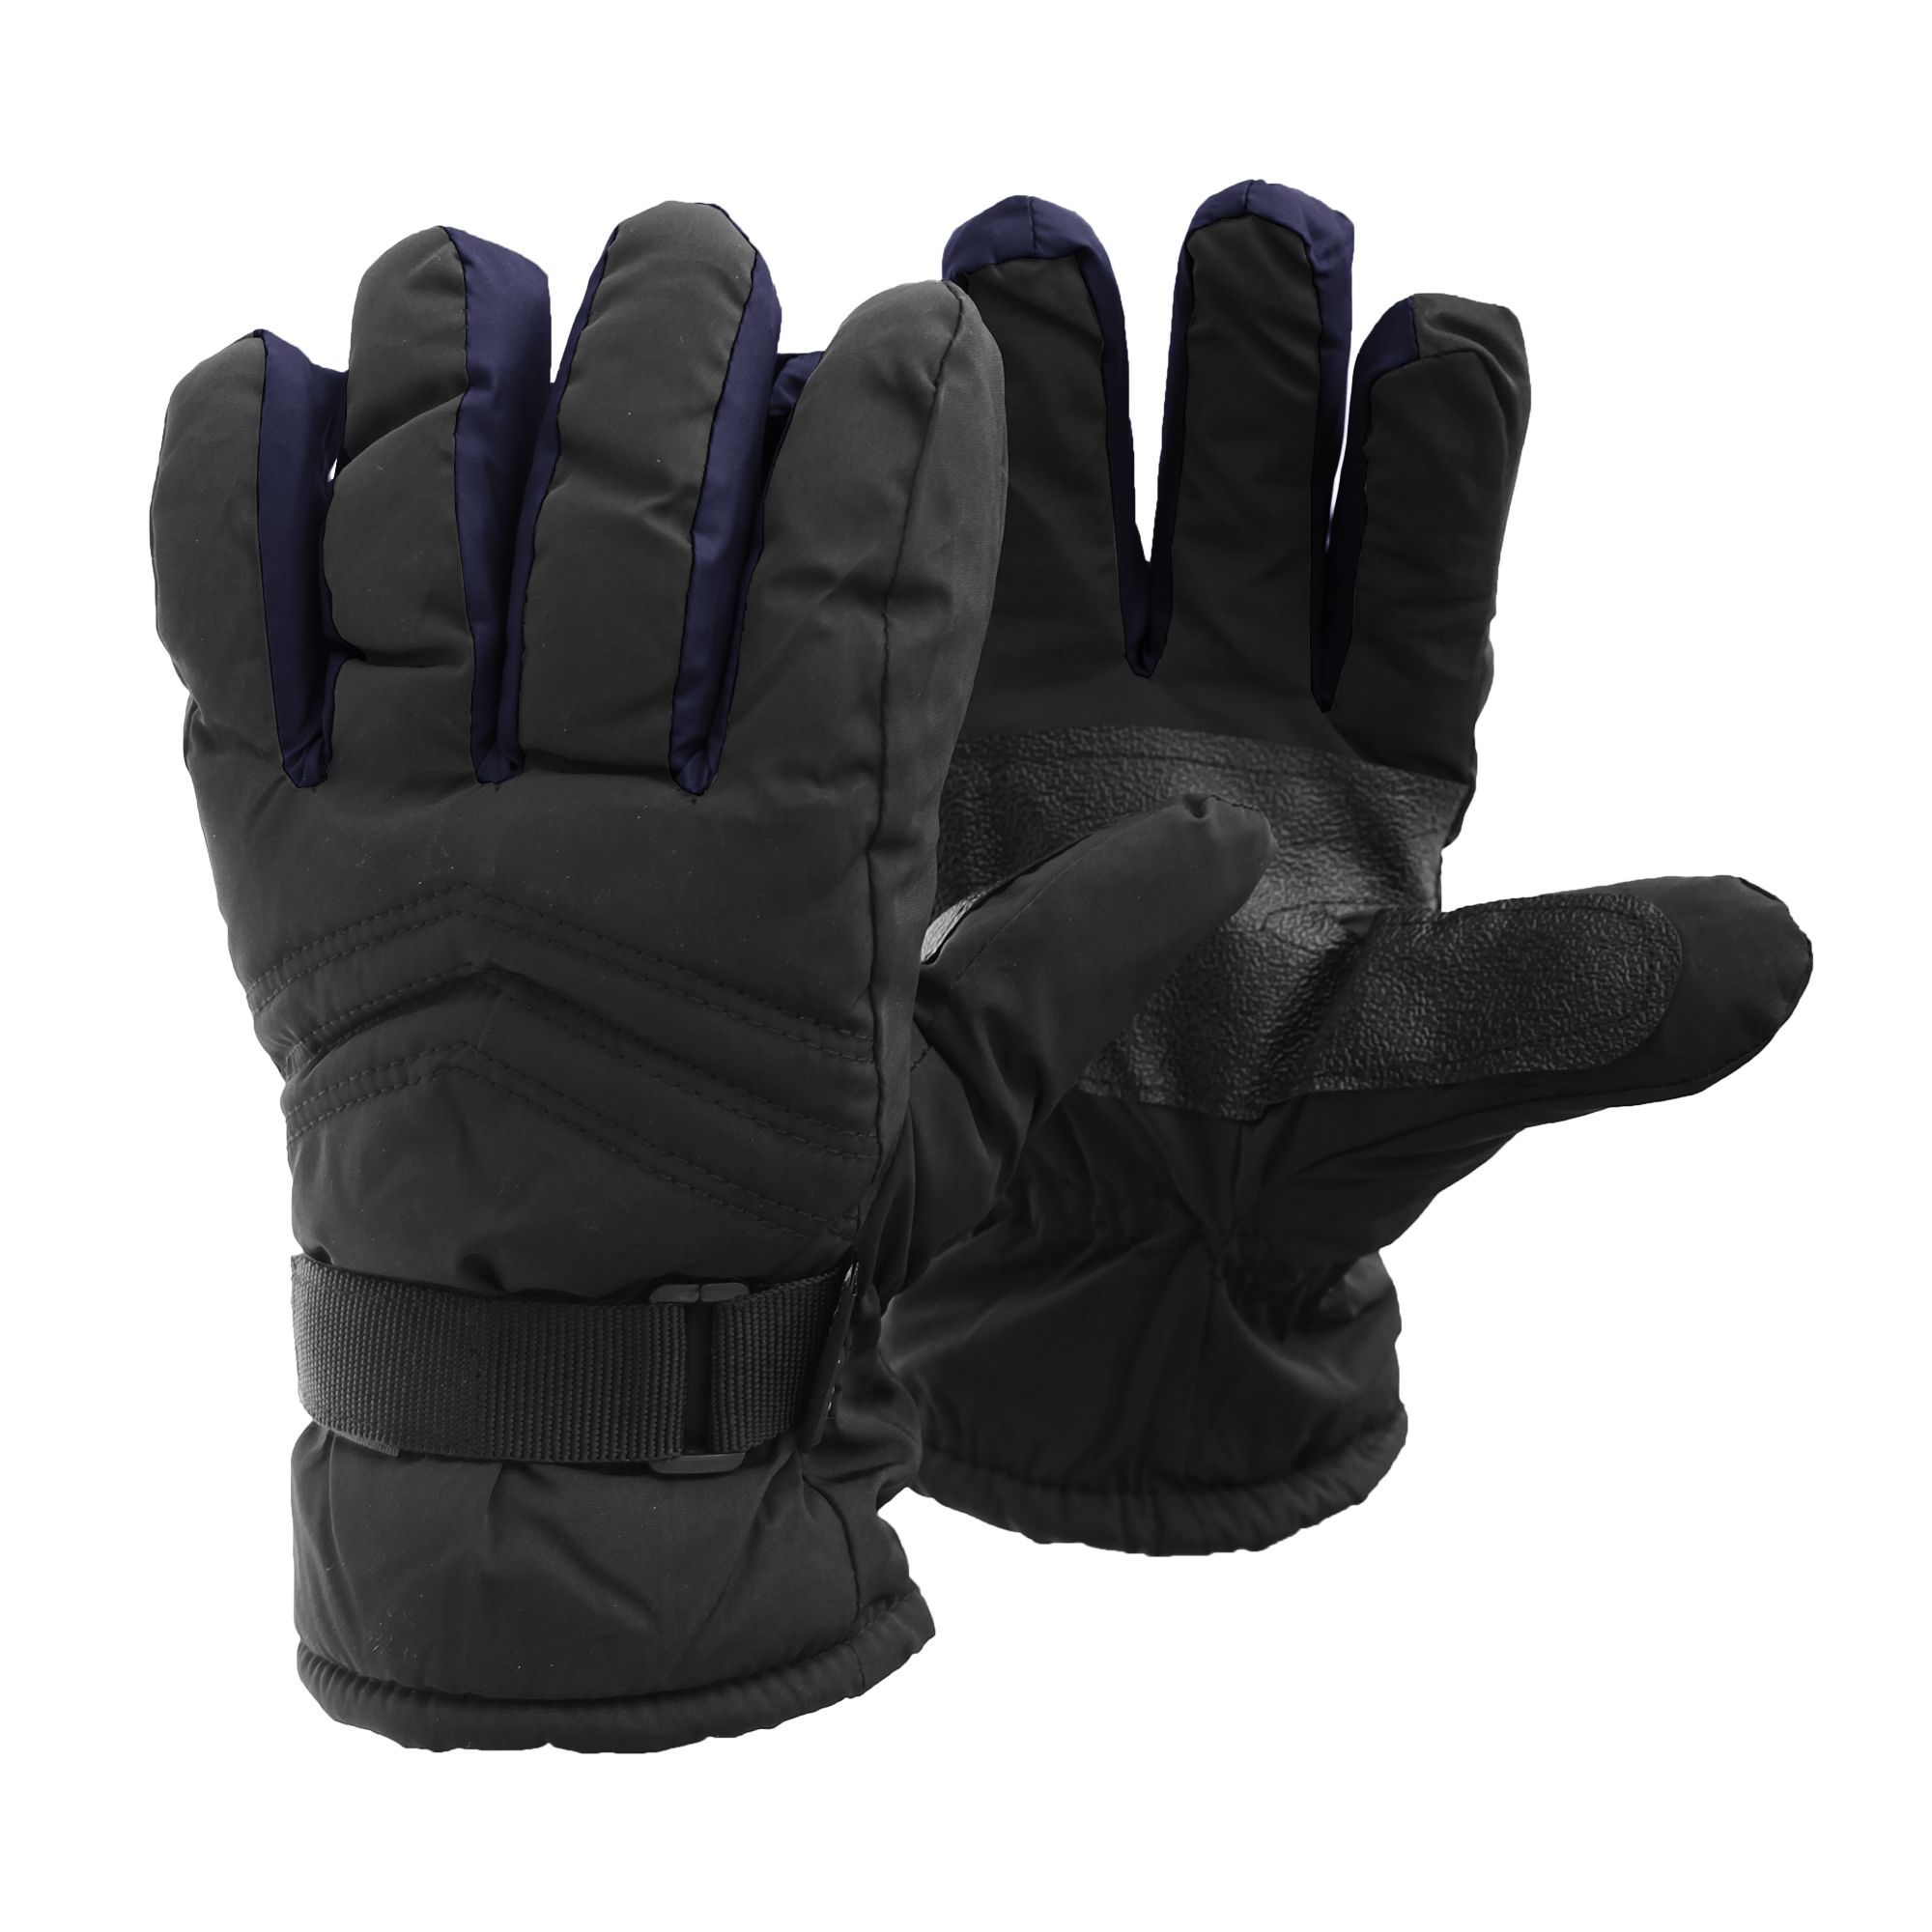 Great quality winter ski gloves. Perfect for wearing in the winter as they keep your hands nice and warm. Comfortable fit. Adjustable touch fastening strap. Fibre: shell 100% Polyester. Palm PVC. Membrane: opp waterproof membrane. Lining 100% Polyester. Wipe clean only.